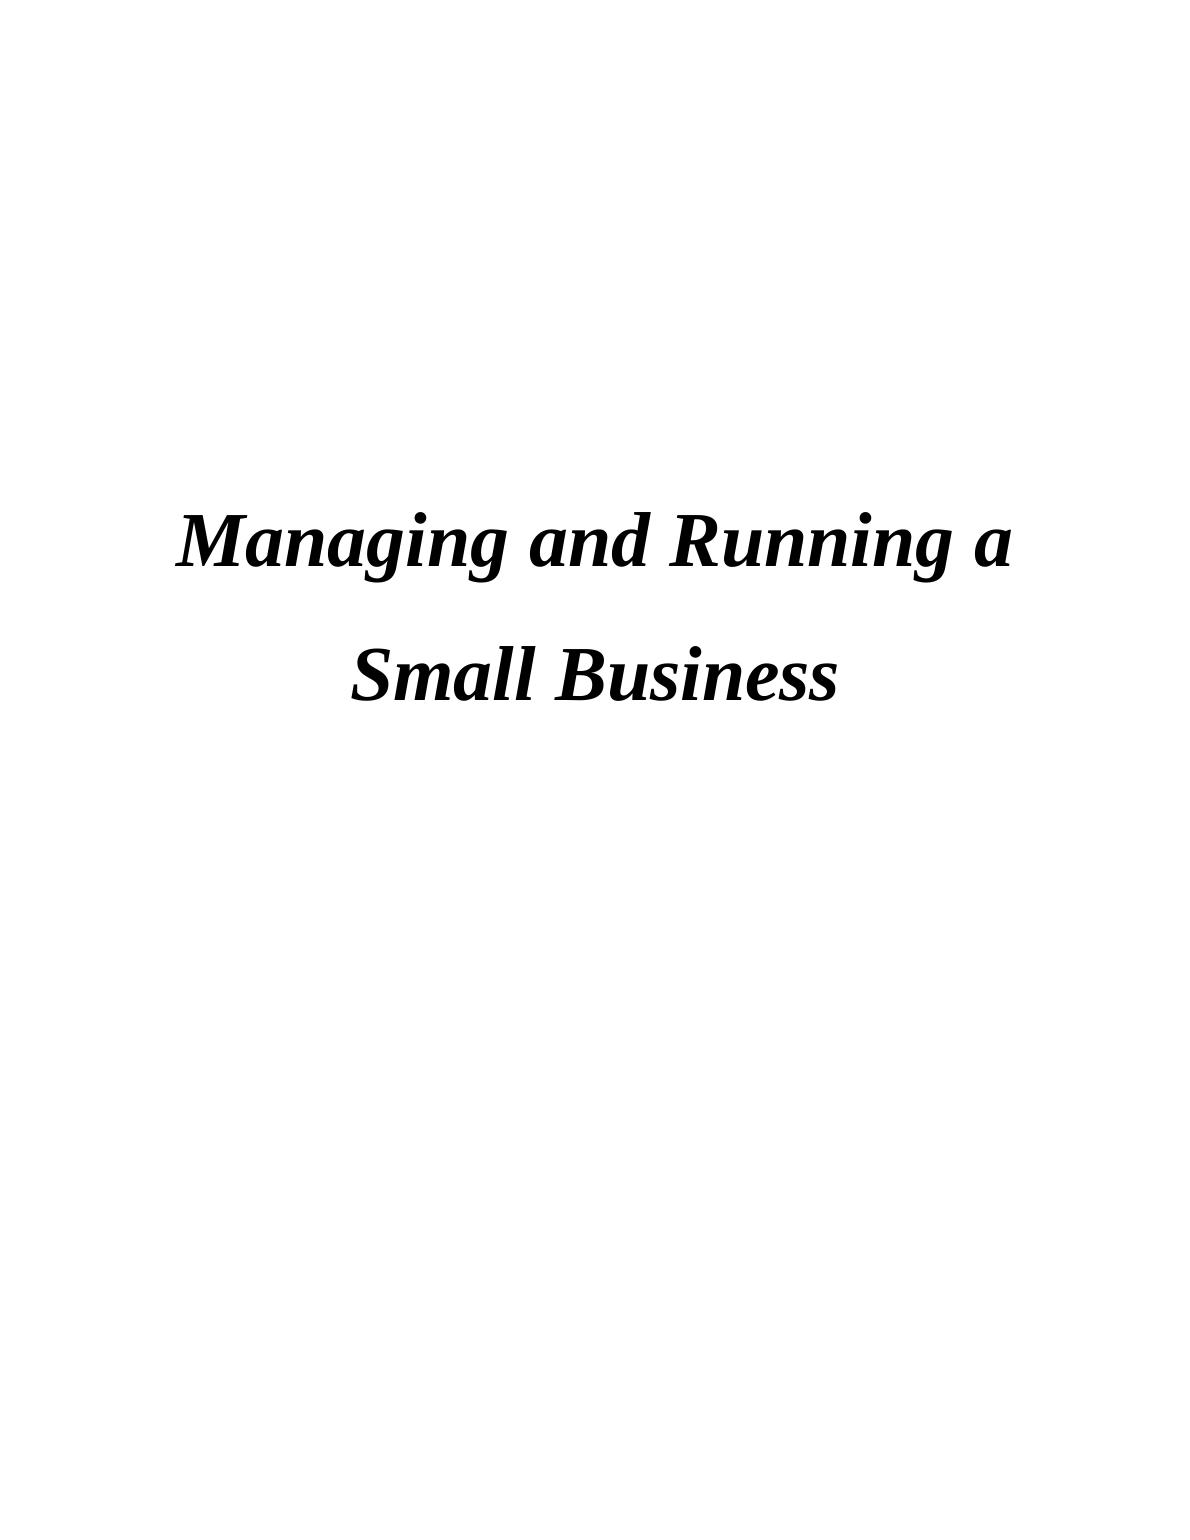 Managing and Running a Small Business Assignment - Talent Plus_1